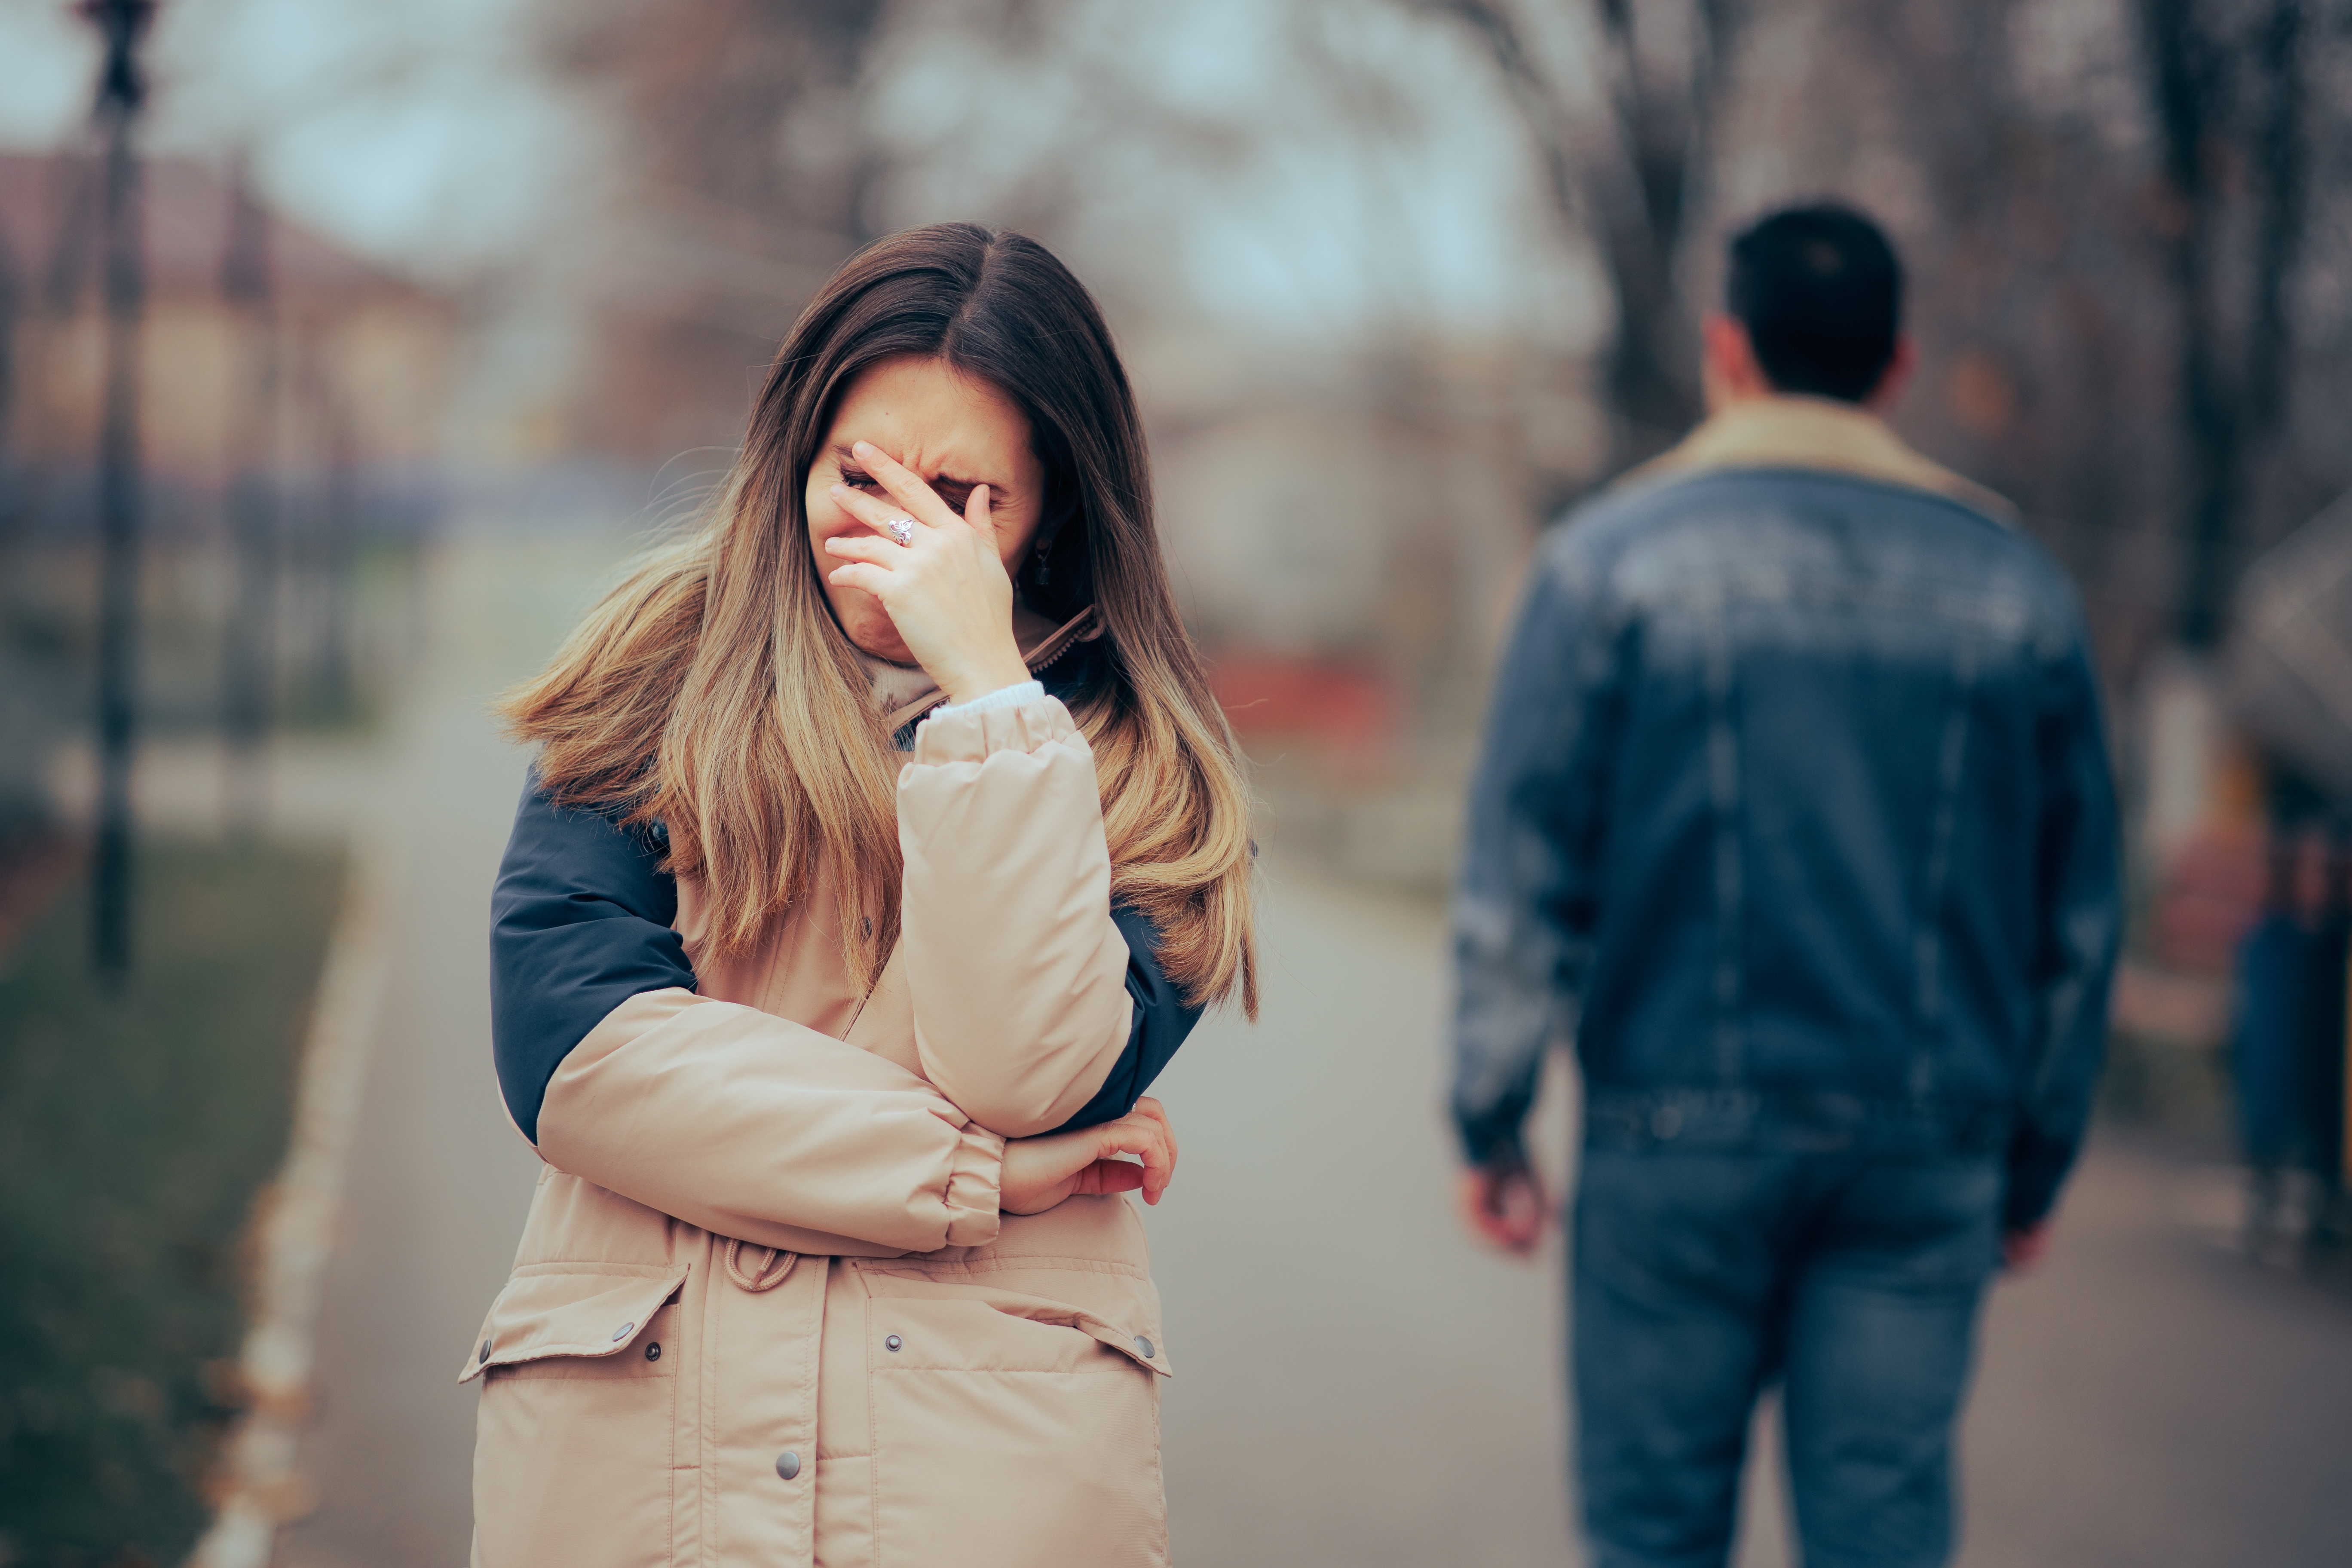 A woman upset after a painful breakup | Source: Shutterstock